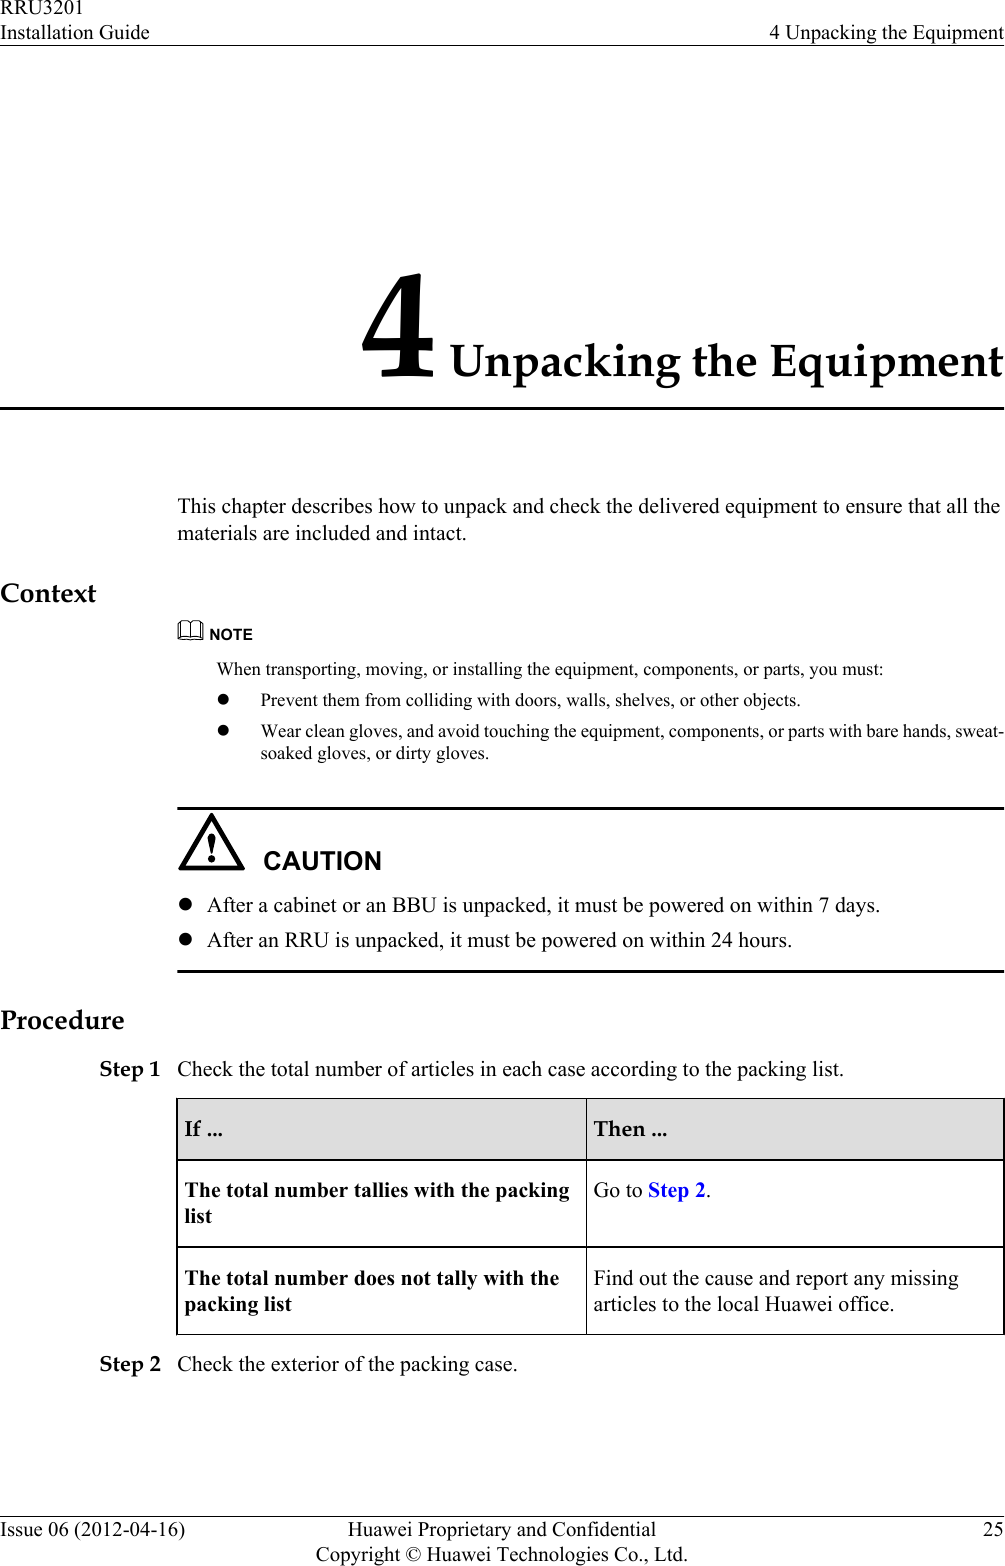 4 Unpacking the EquipmentThis chapter describes how to unpack and check the delivered equipment to ensure that all thematerials are included and intact.ContextNOTEWhen transporting, moving, or installing the equipment, components, or parts, you must:lPrevent them from colliding with doors, walls, shelves, or other objects.lWear clean gloves, and avoid touching the equipment, components, or parts with bare hands, sweat-soaked gloves, or dirty gloves.CAUTIONlAfter a cabinet or an BBU is unpacked, it must be powered on within 7 days.lAfter an RRU is unpacked, it must be powered on within 24 hours.ProcedureStep 1 Check the total number of articles in each case according to the packing list.If ... Then ...The total number tallies with the packinglistGo to Step 2.The total number does not tally with thepacking listFind out the cause and report any missingarticles to the local Huawei office.Step 2 Check the exterior of the packing case.RRU3201Installation Guide 4 Unpacking the EquipmentIssue 06 (2012-04-16) Huawei Proprietary and ConfidentialCopyright © Huawei Technologies Co., Ltd.25